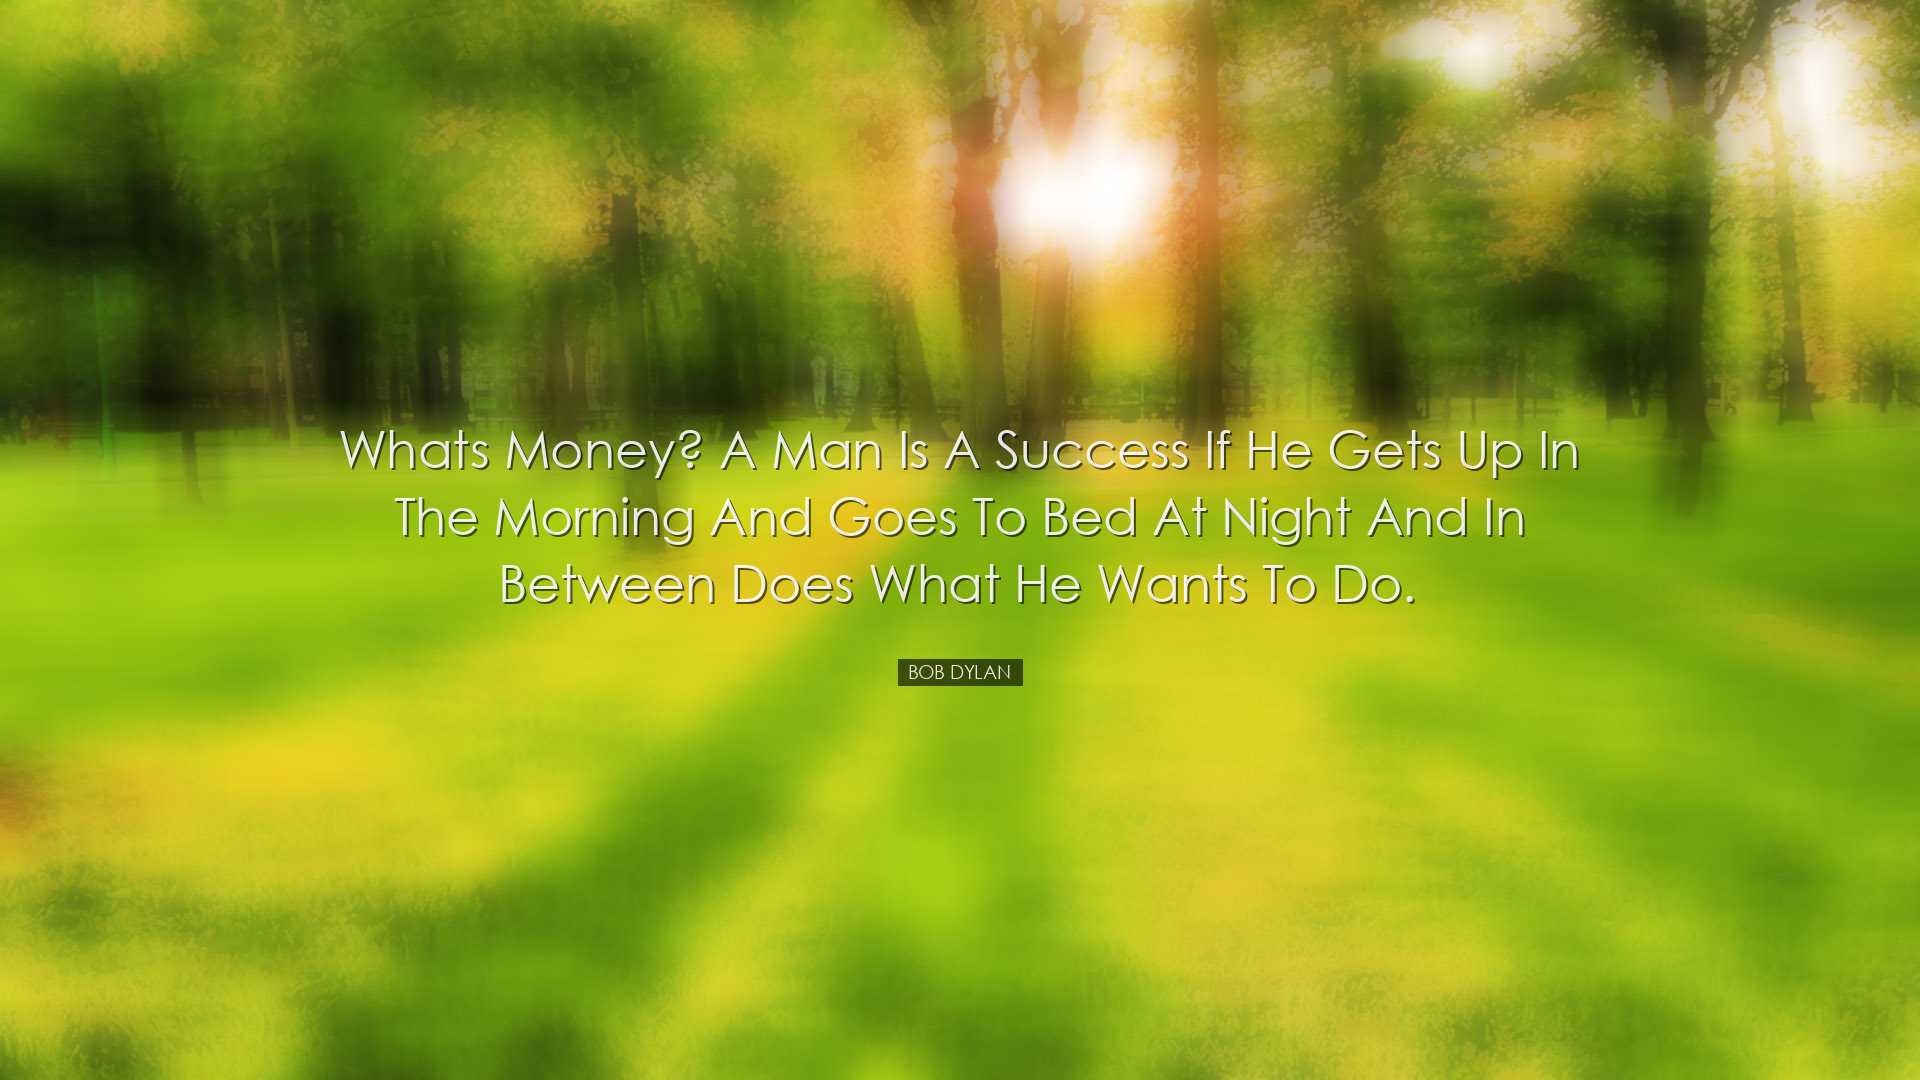 Whats money? A man is a success if he gets up in the morning and g